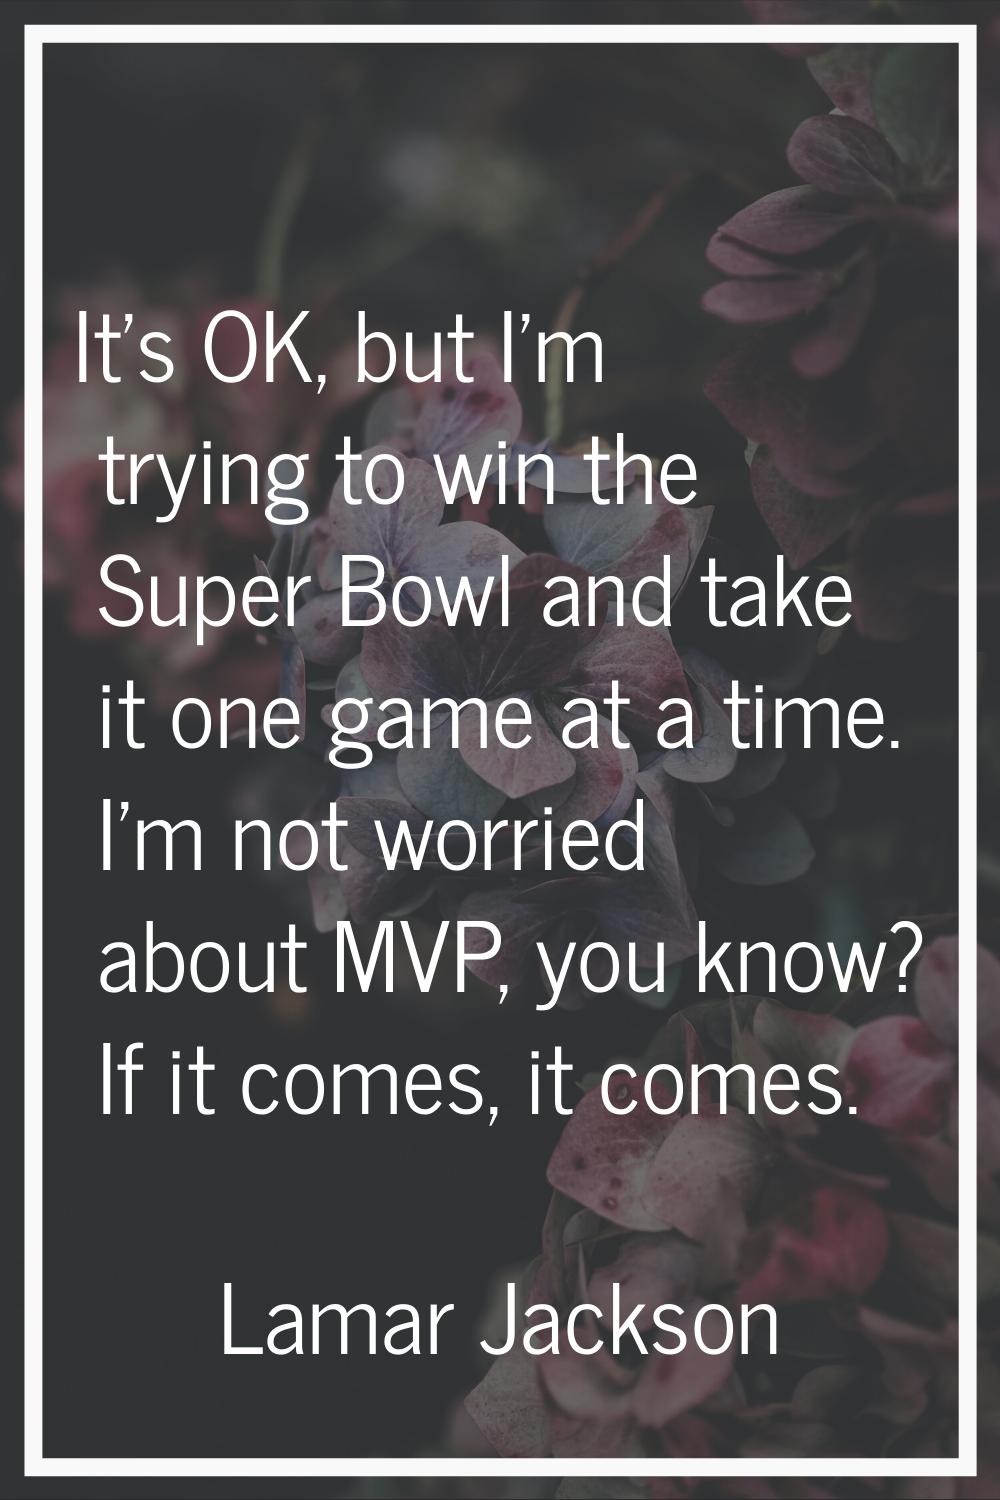 It's OK, but I'm trying to win the Super Bowl and take it one game at a time. I'm not worried about